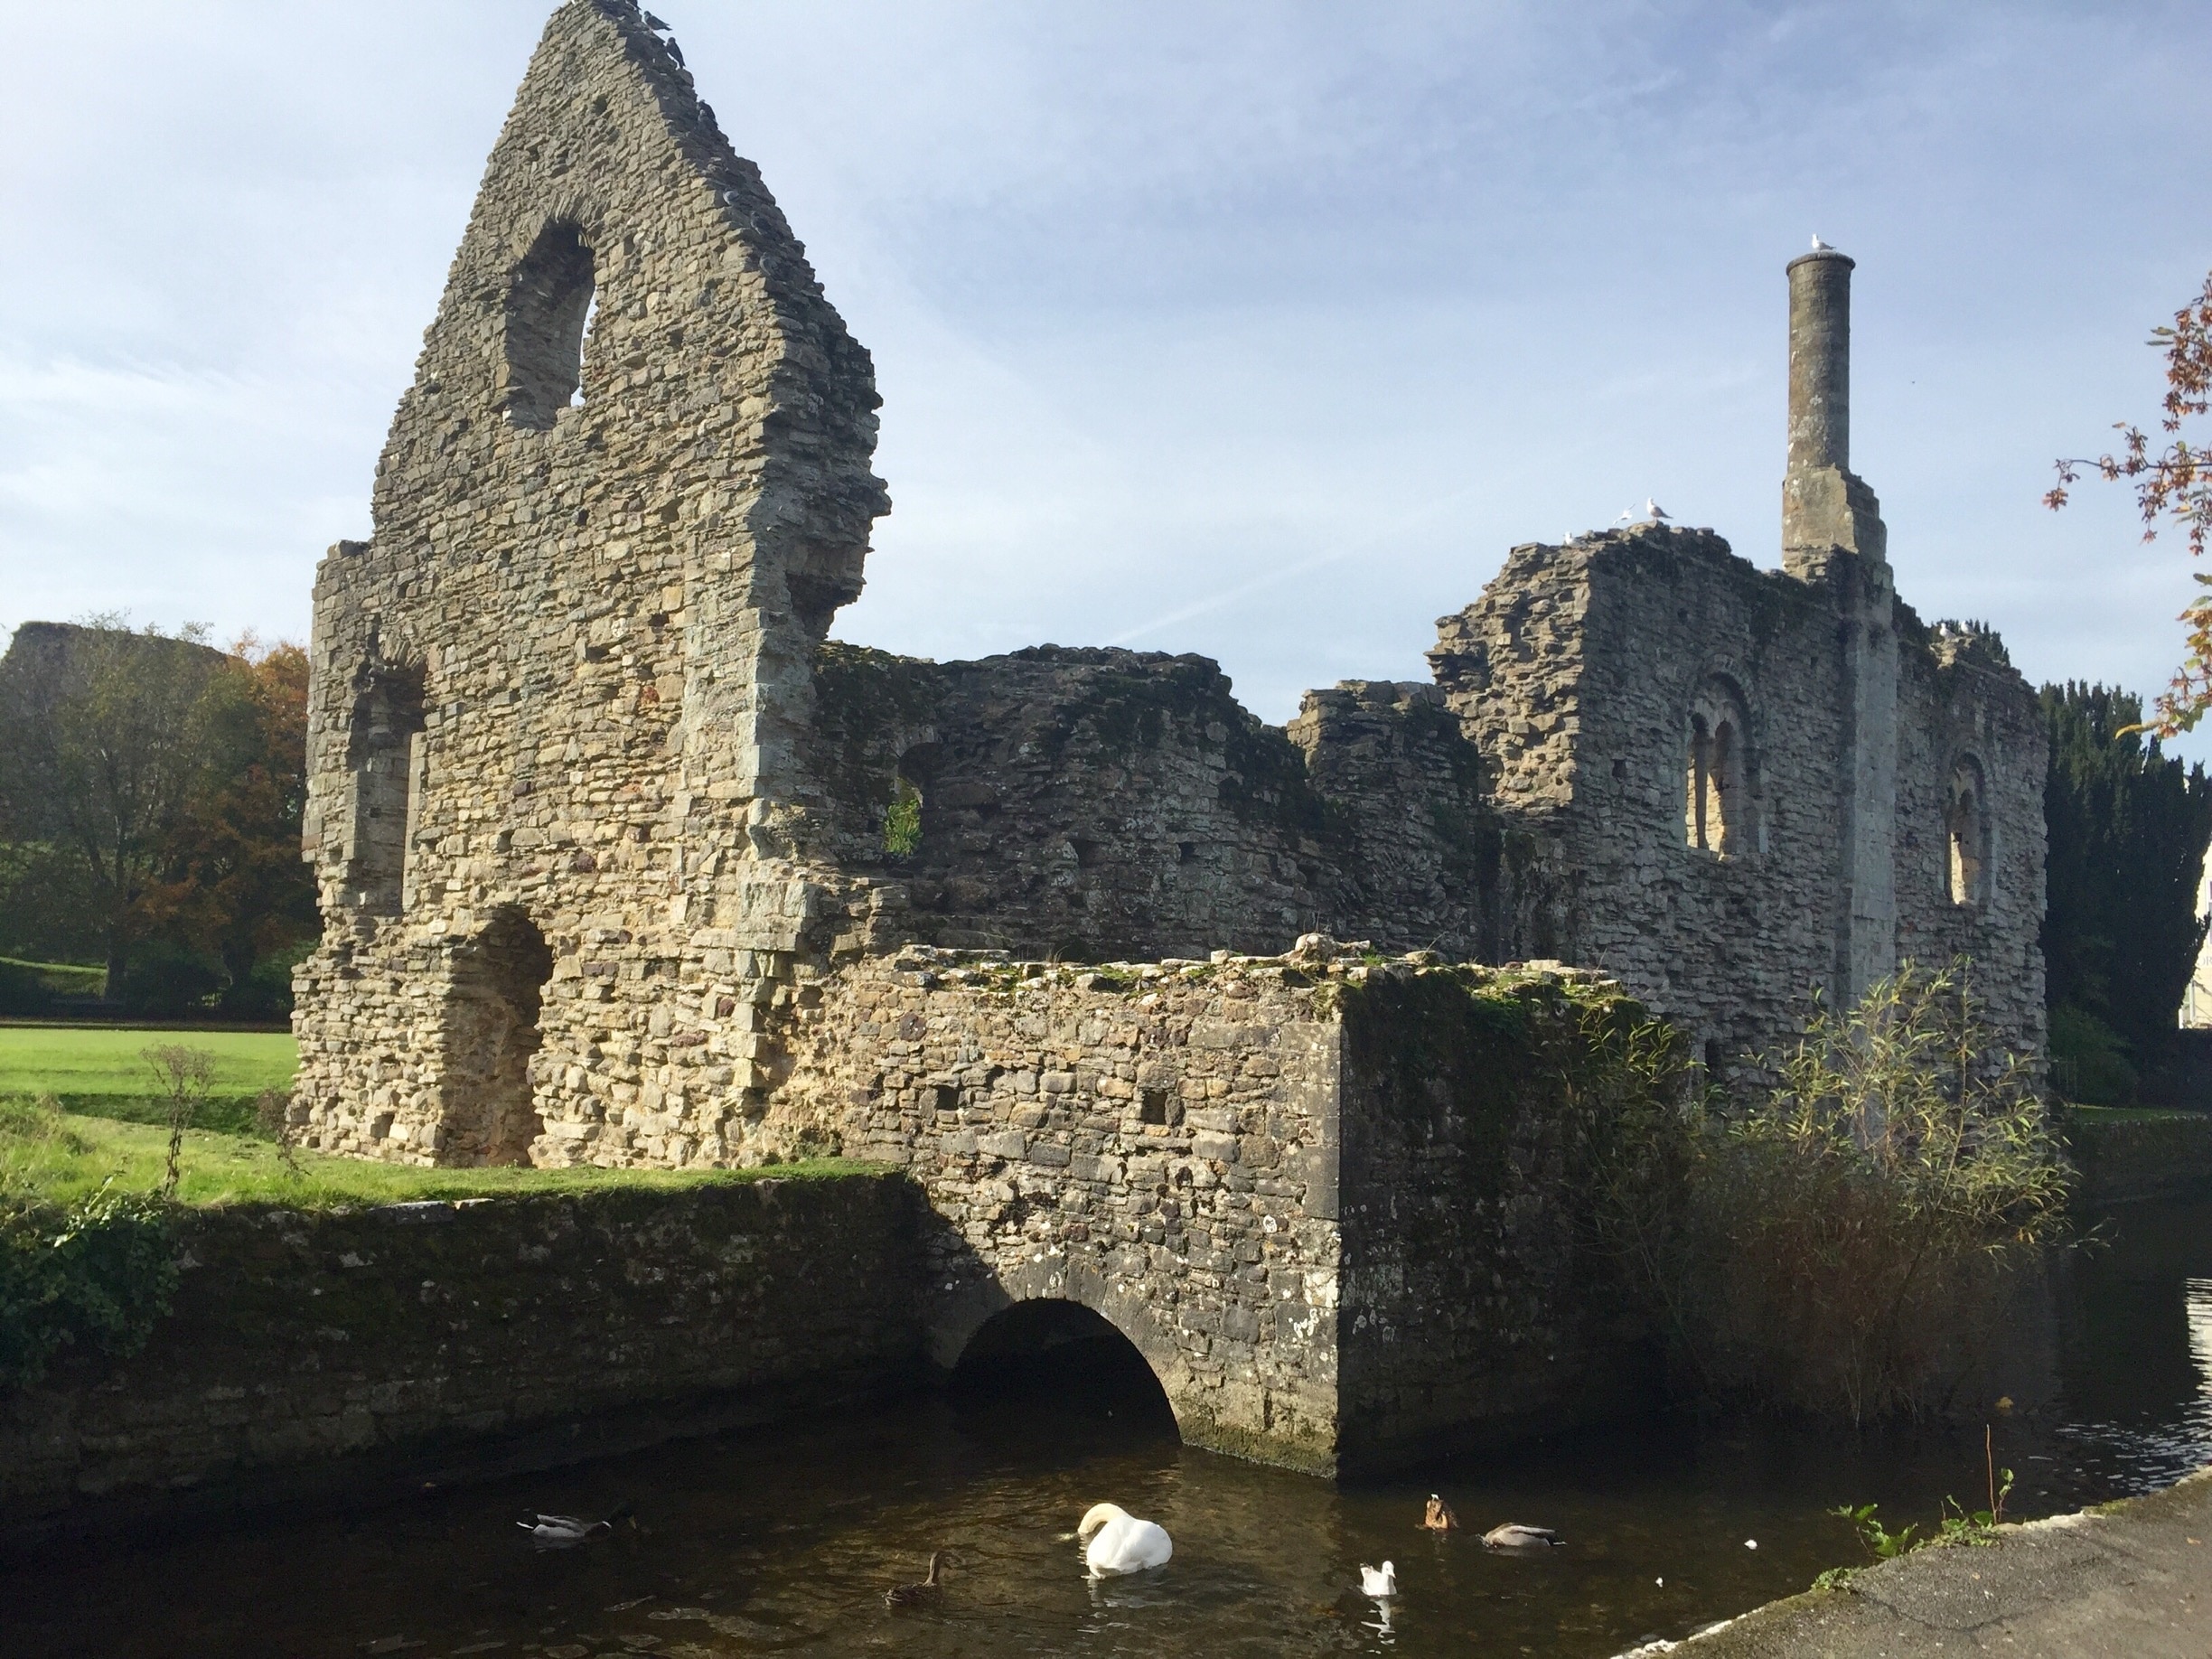 Christchurch ruins, lovely walk followed by tea and cake!